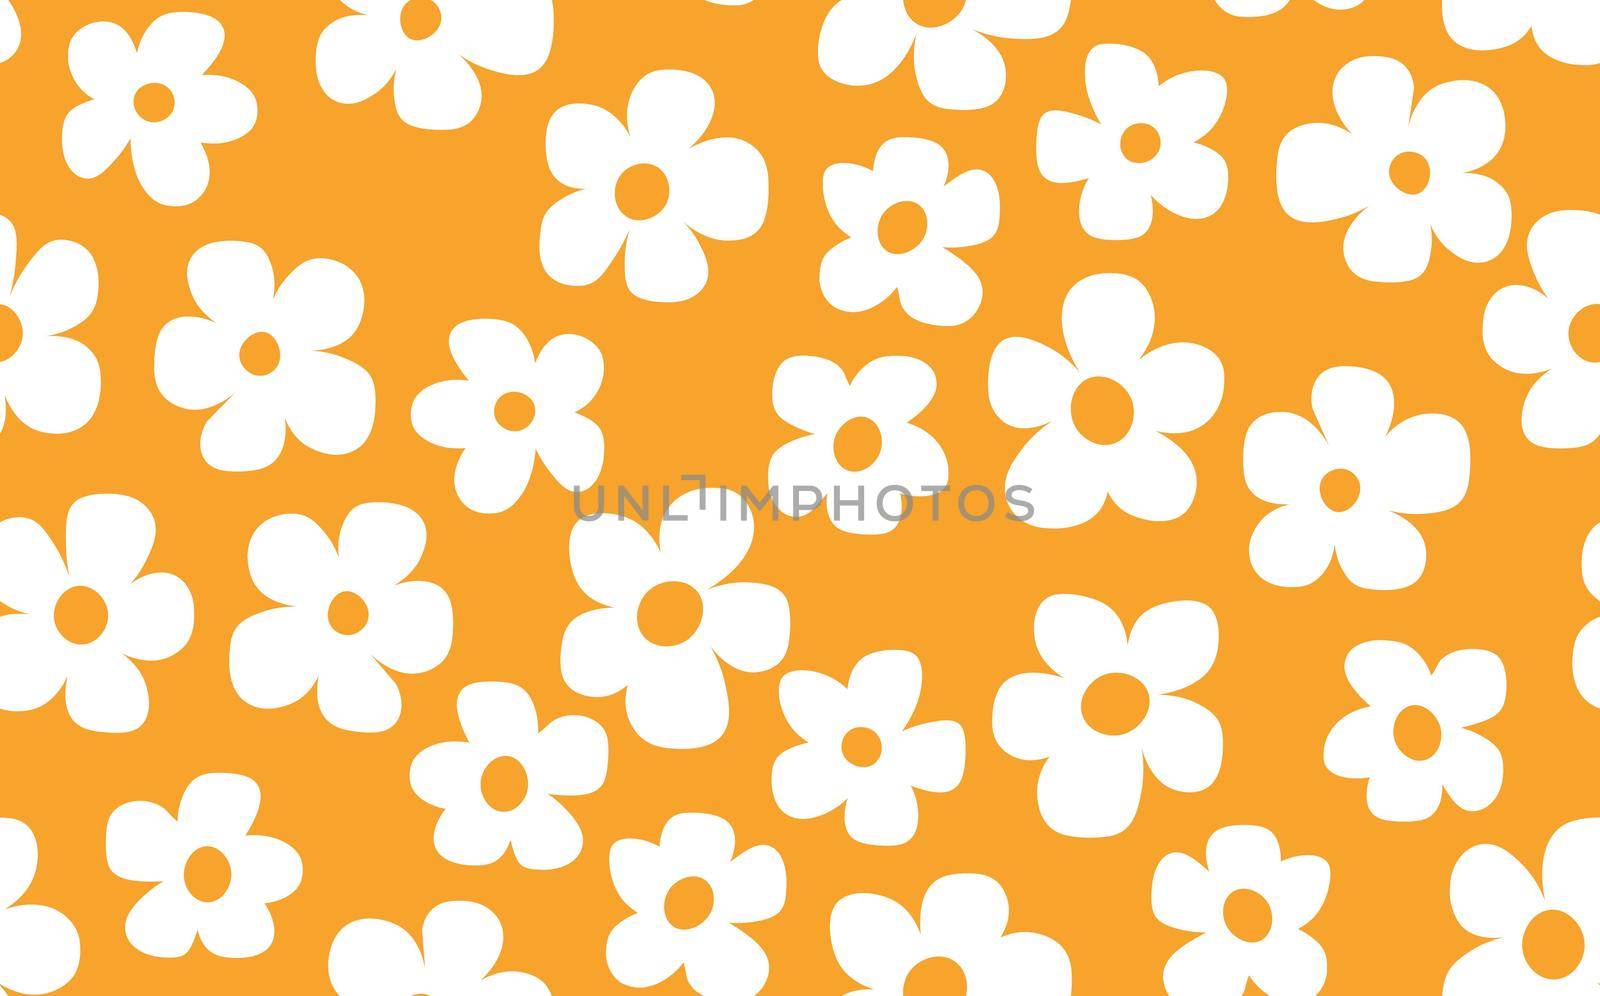 Floral seamless with hand drawn color flowers. Cute summer background. Modern floral compositions. Fashion vector stock illustration for wallpaper, posters, card, fabric, textile.